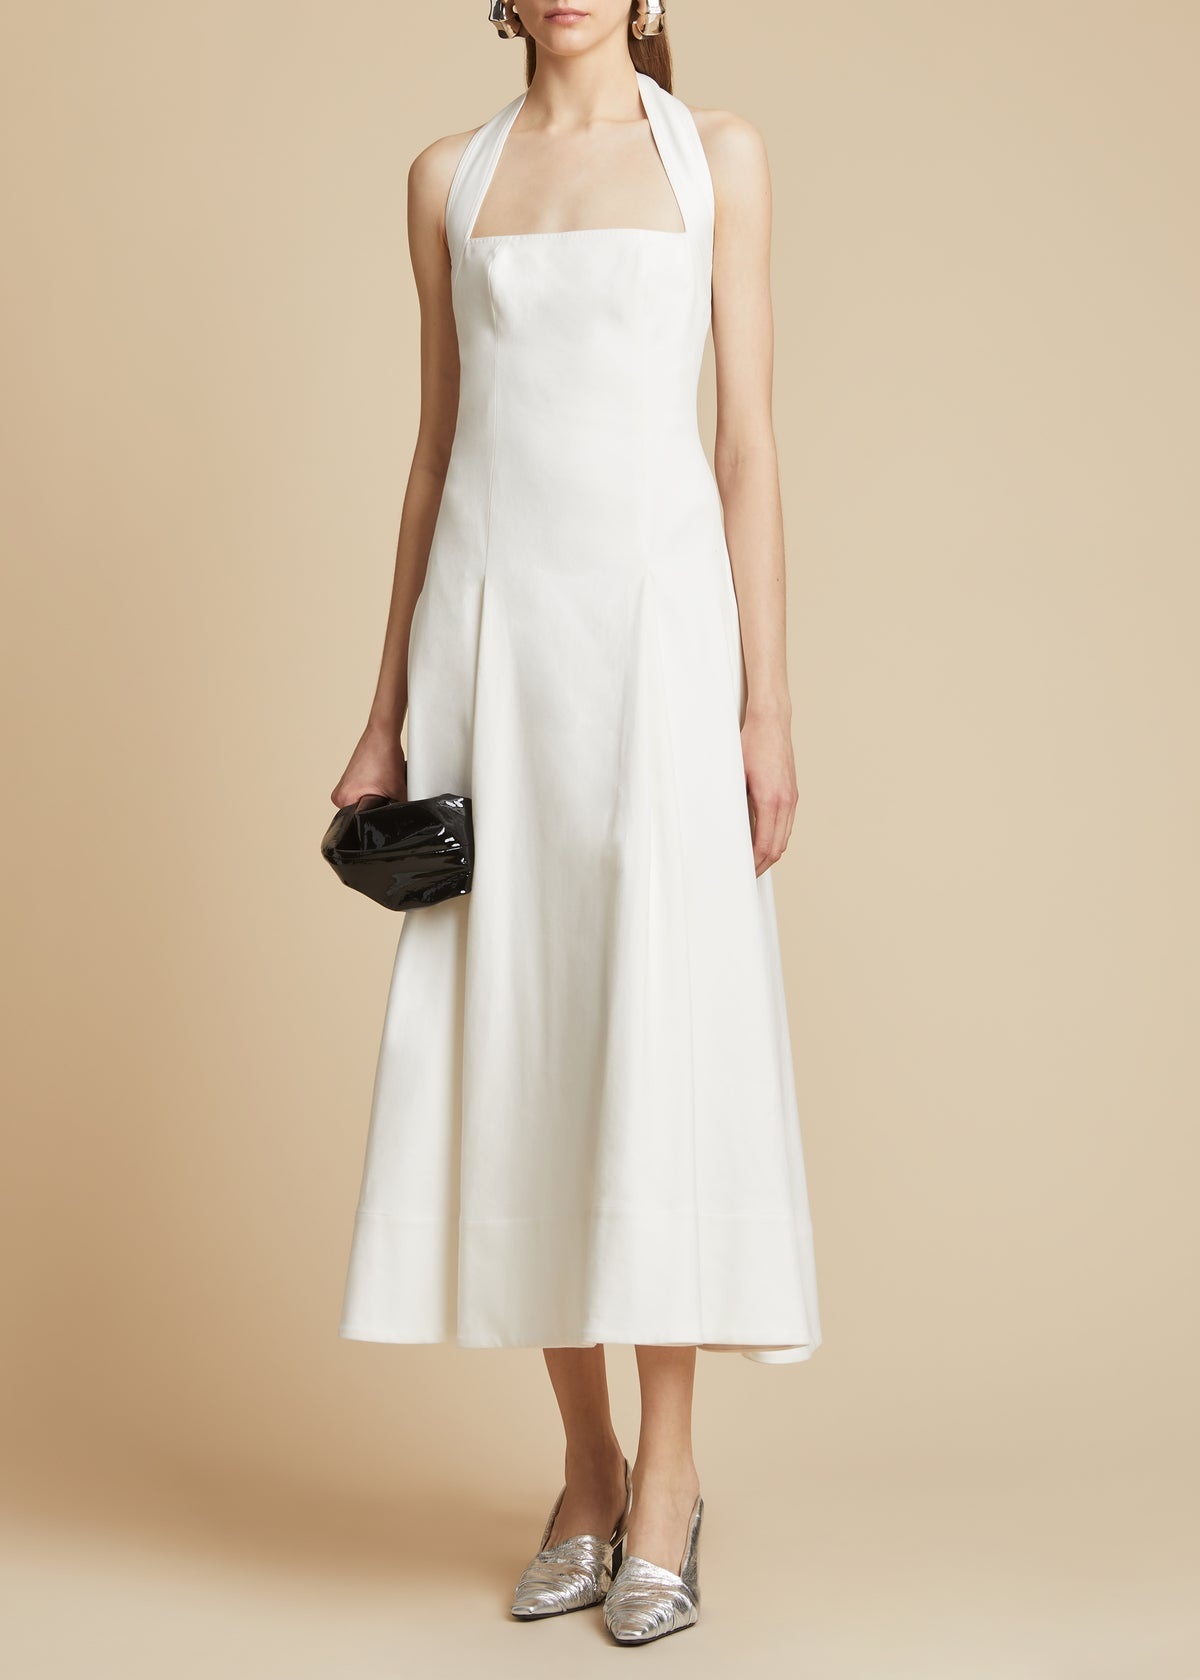 The Lalita Dress in White - 1